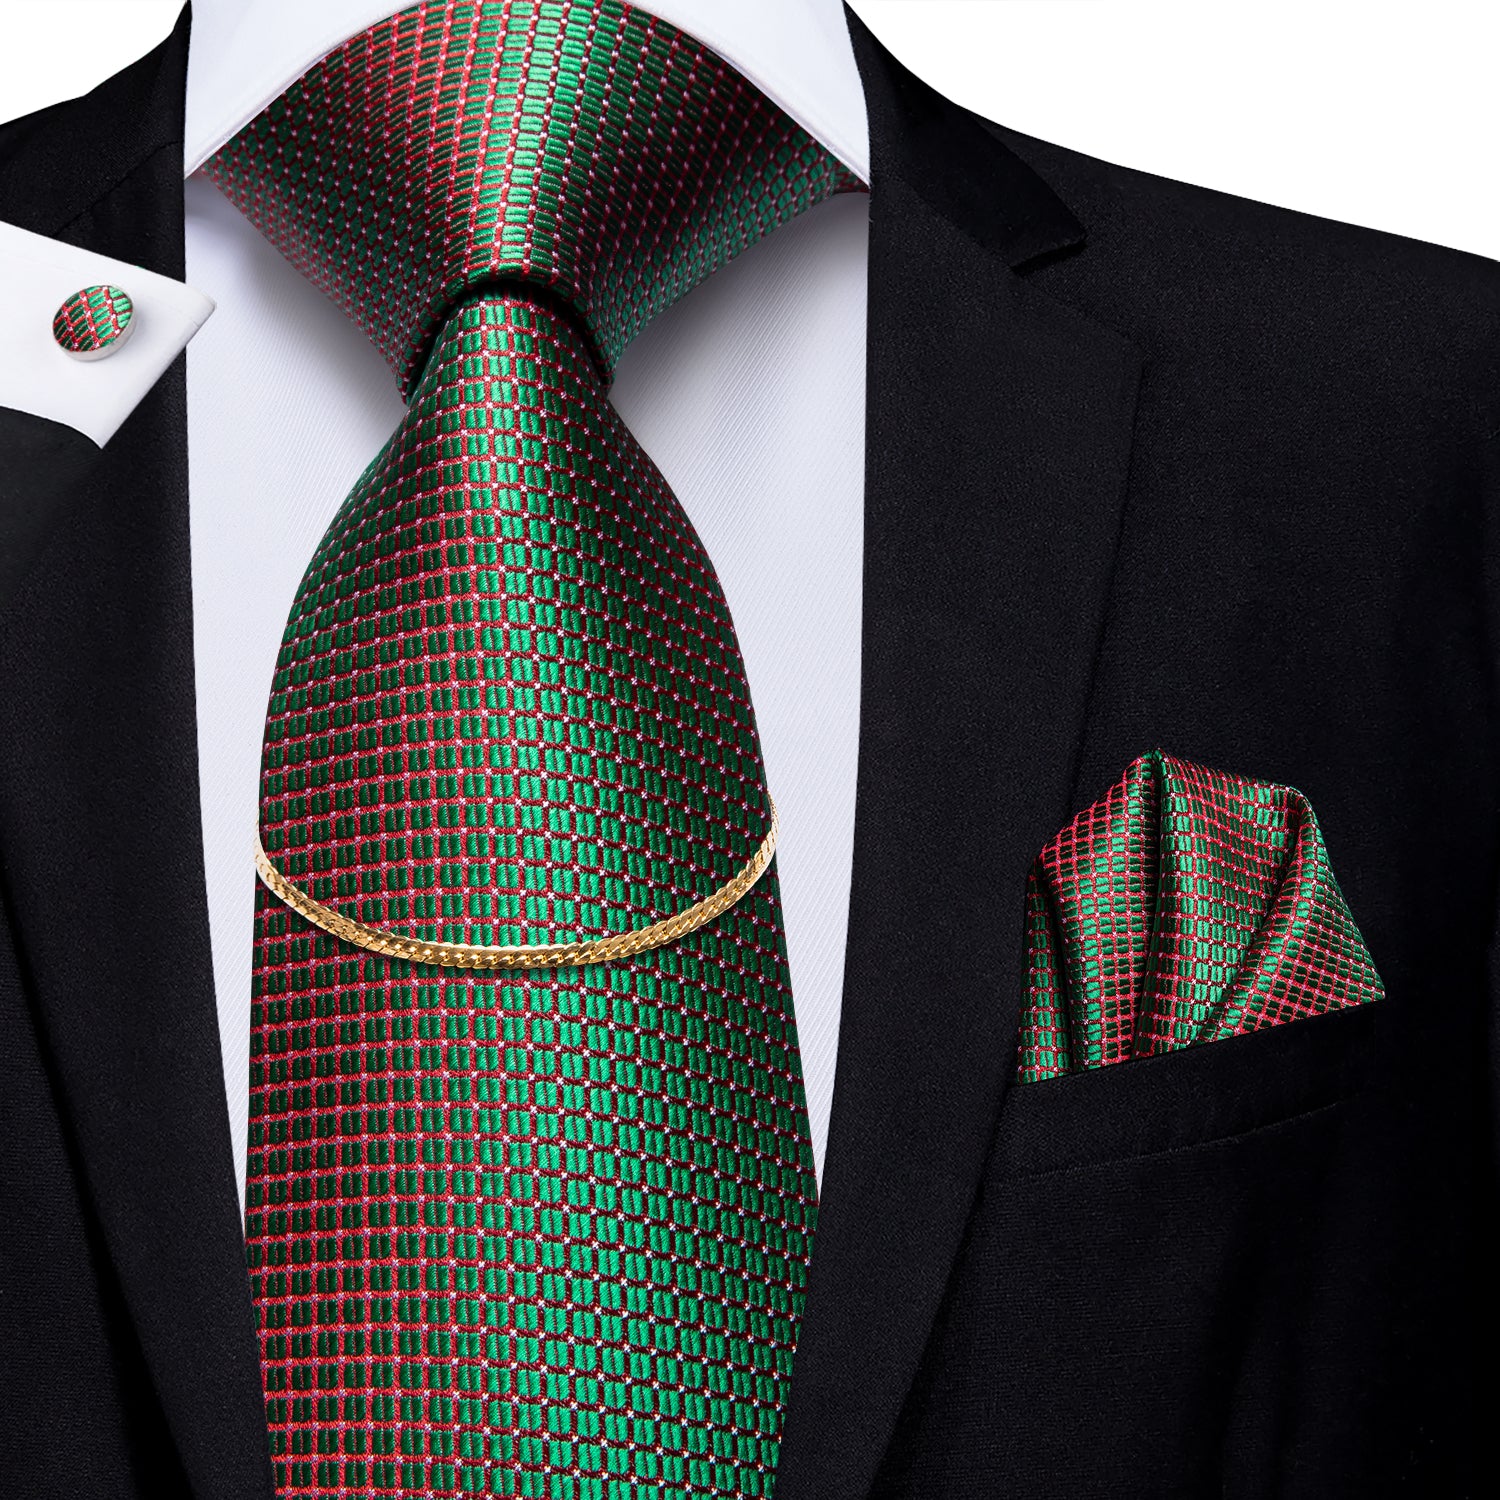 Shining Green Plaid Tie Pocket Square Cufflinks Set With Golden Chain